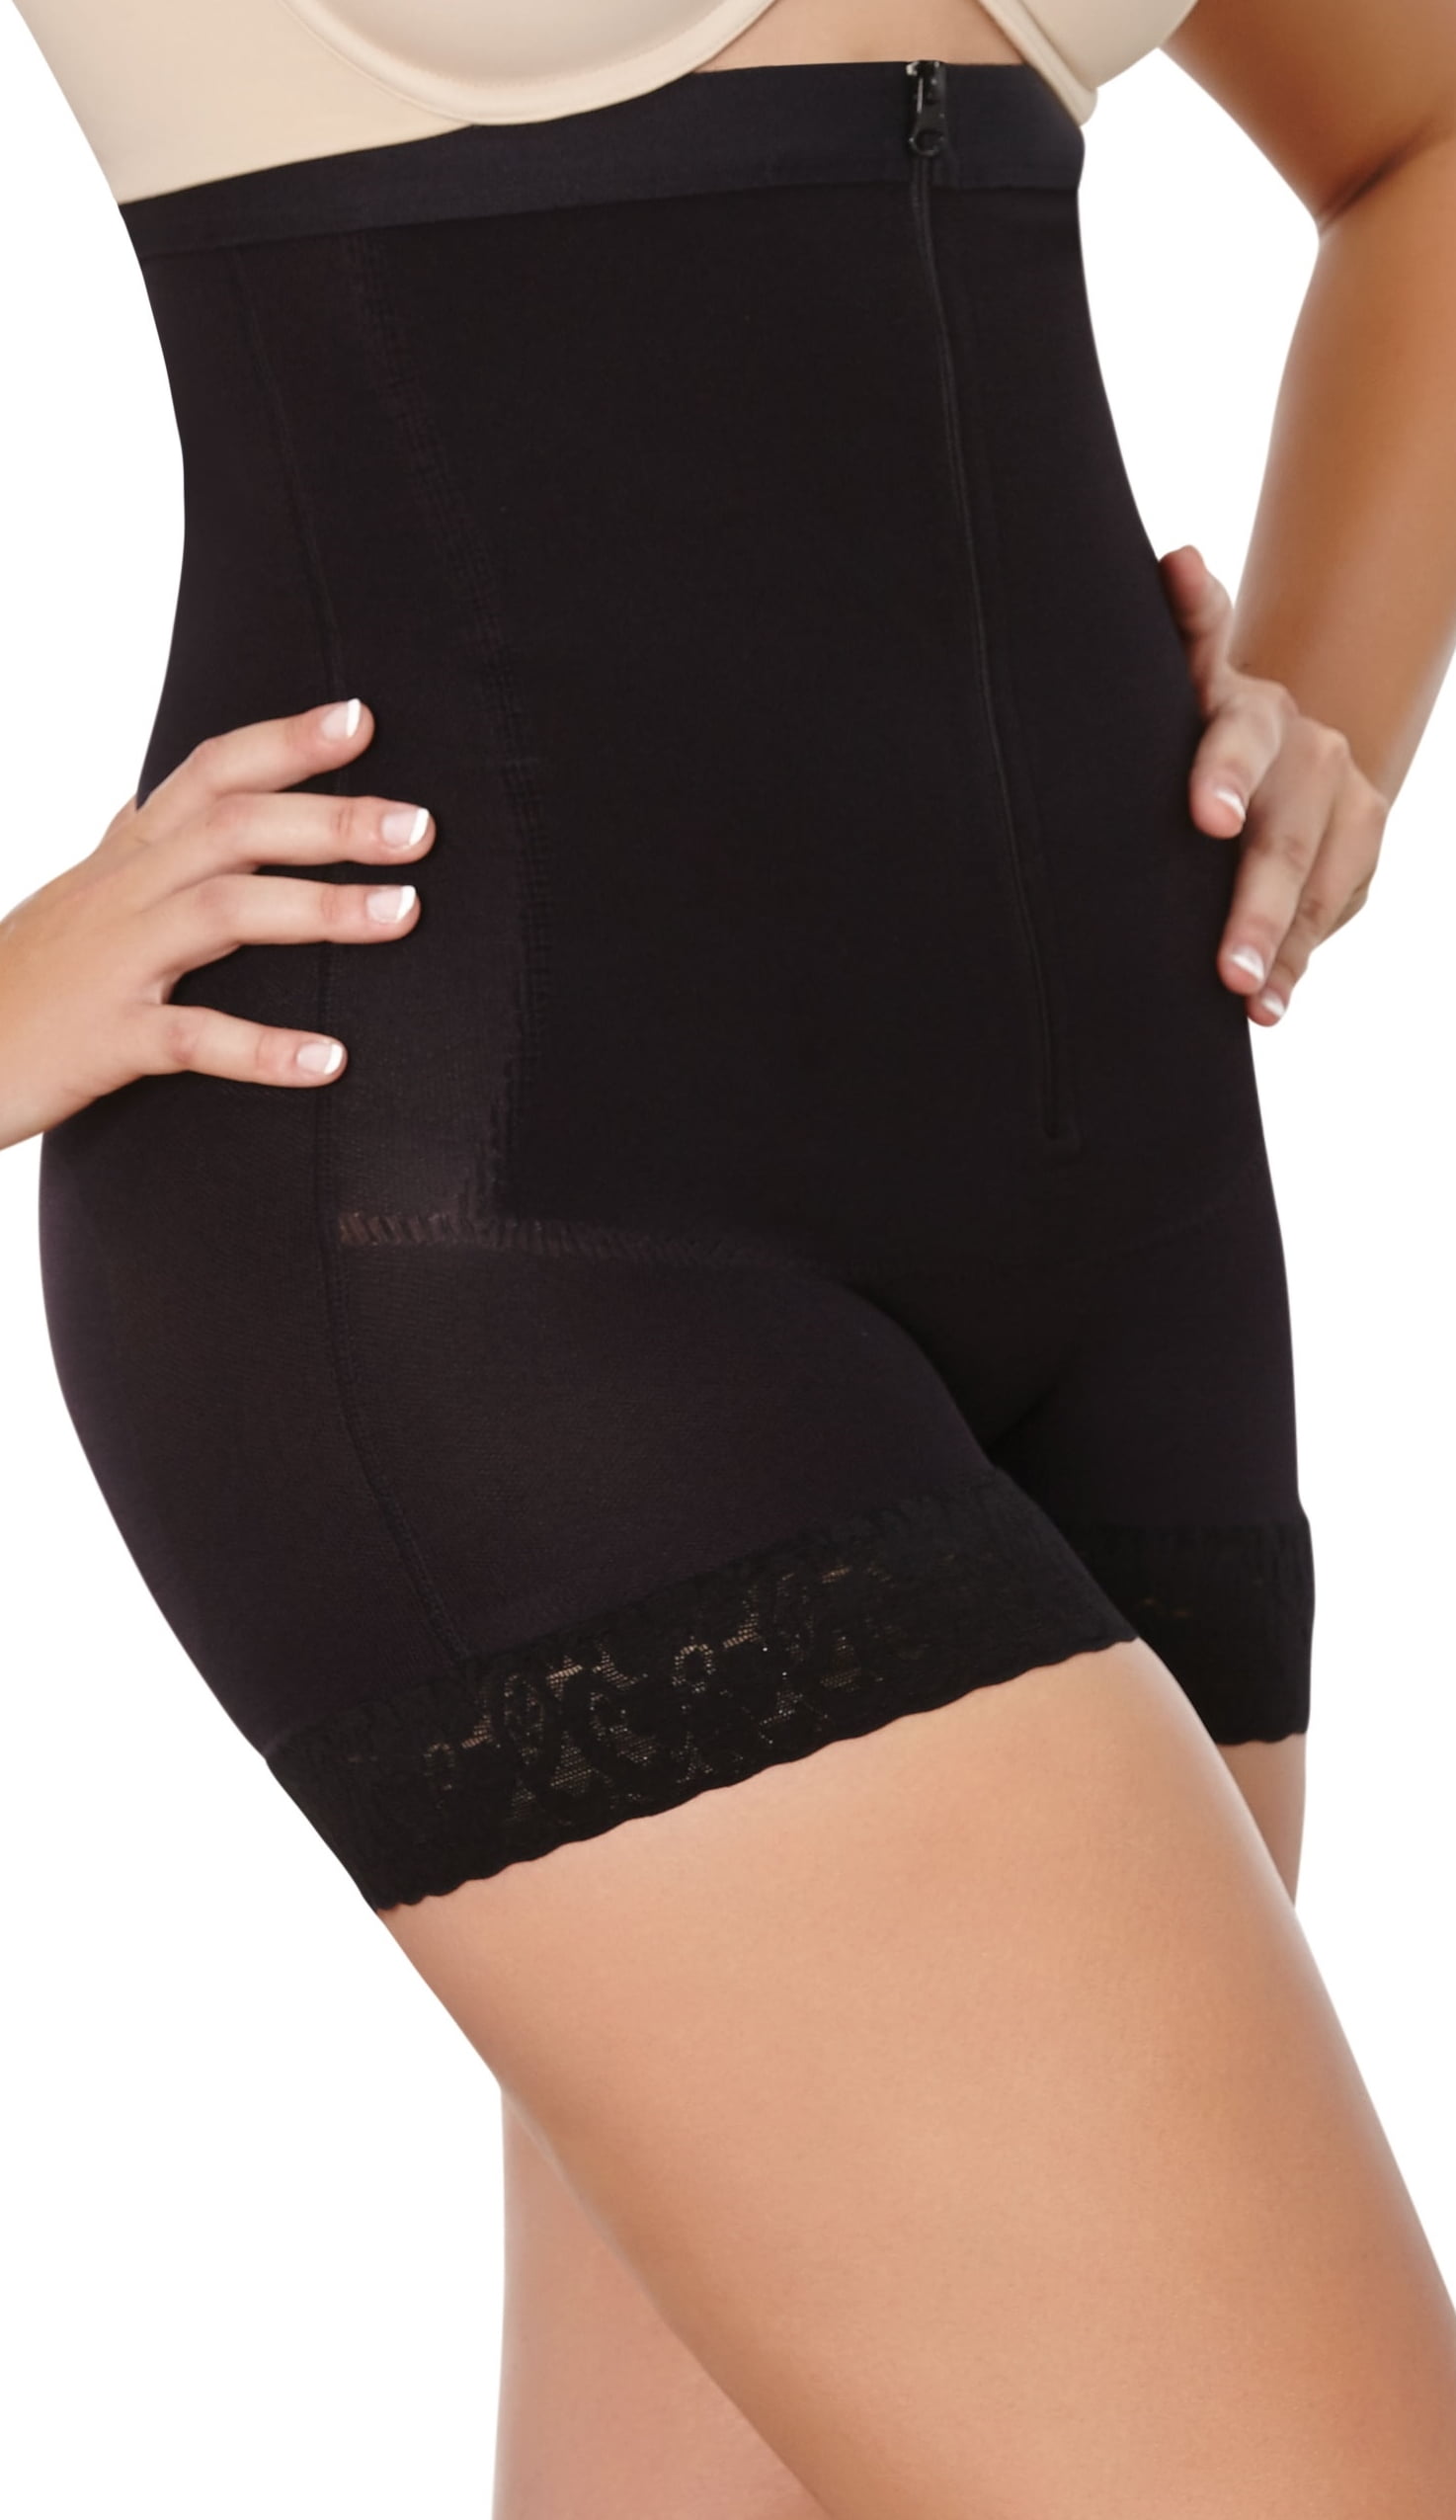 ShapEager Fresh & Light Premium Colombian Braless Body Shaper India